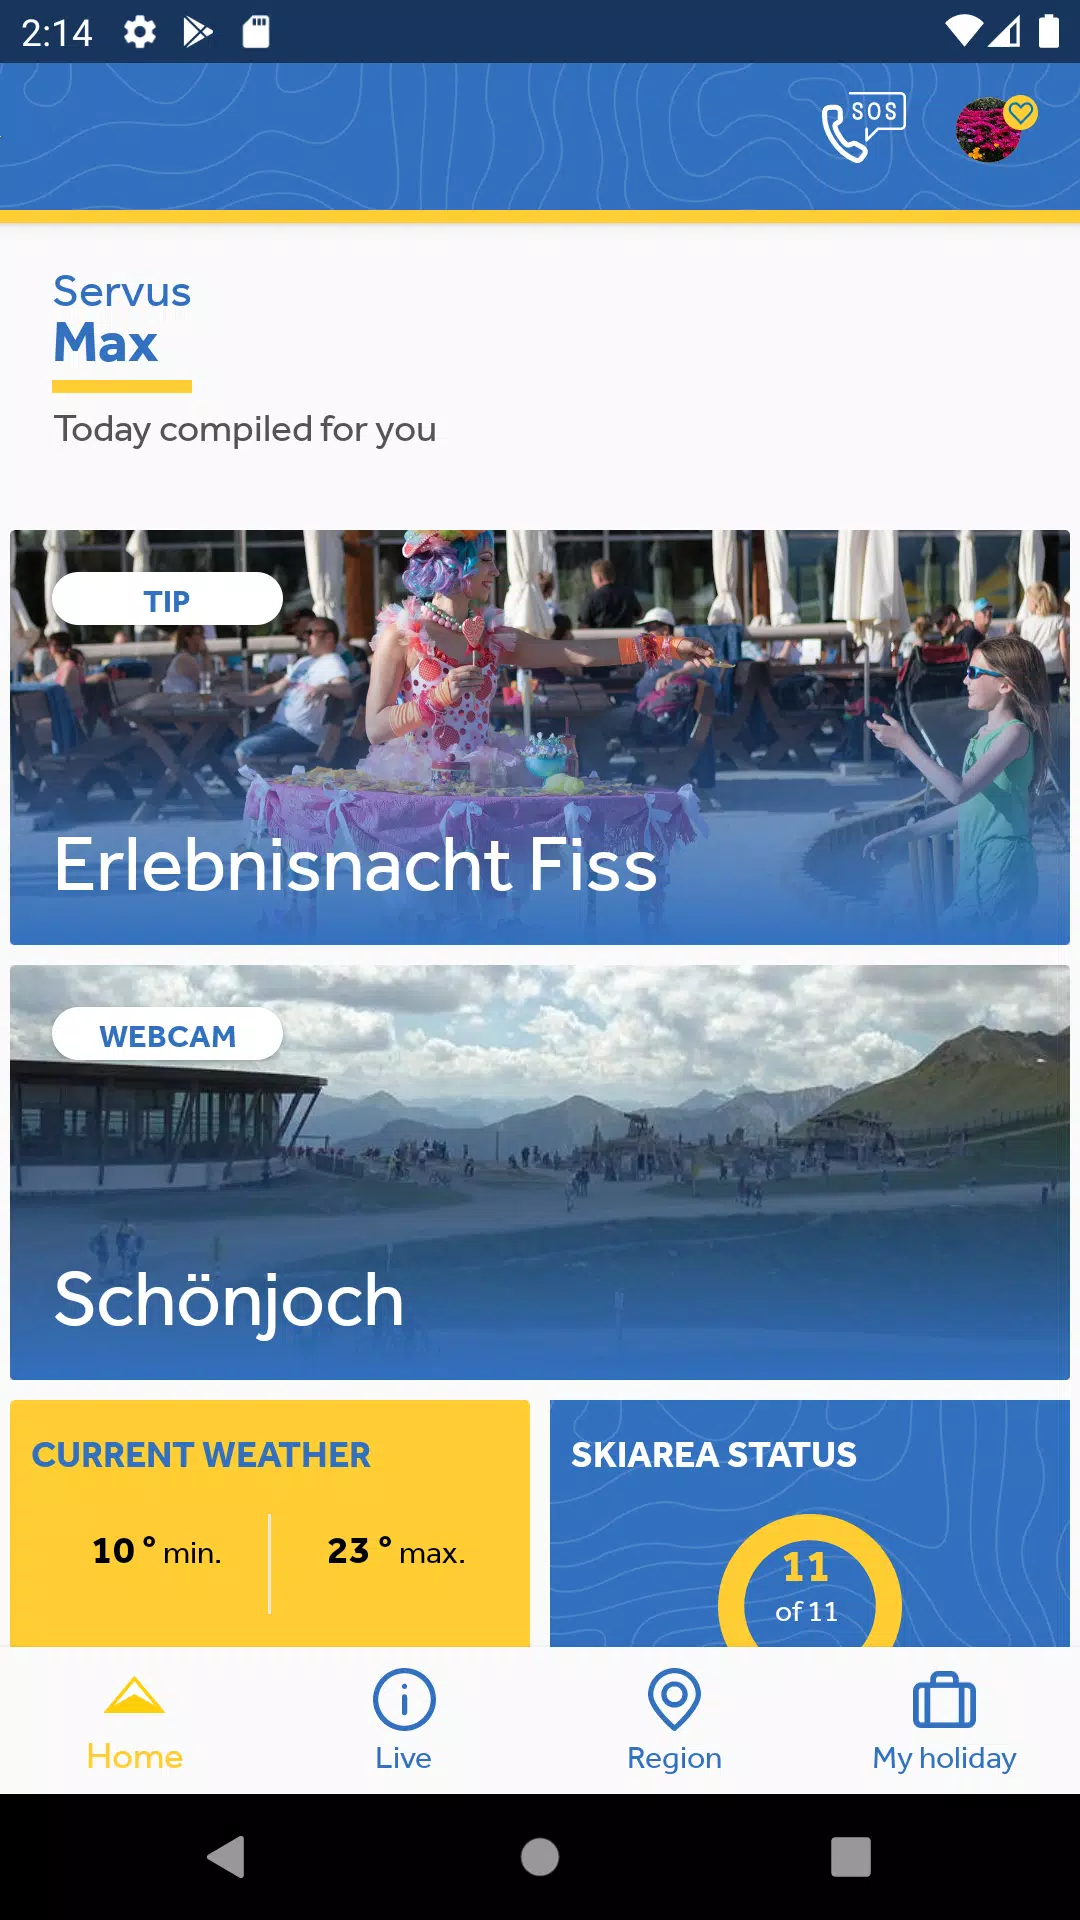 Serfaus-Fiss-Ladis for Android - APK Download